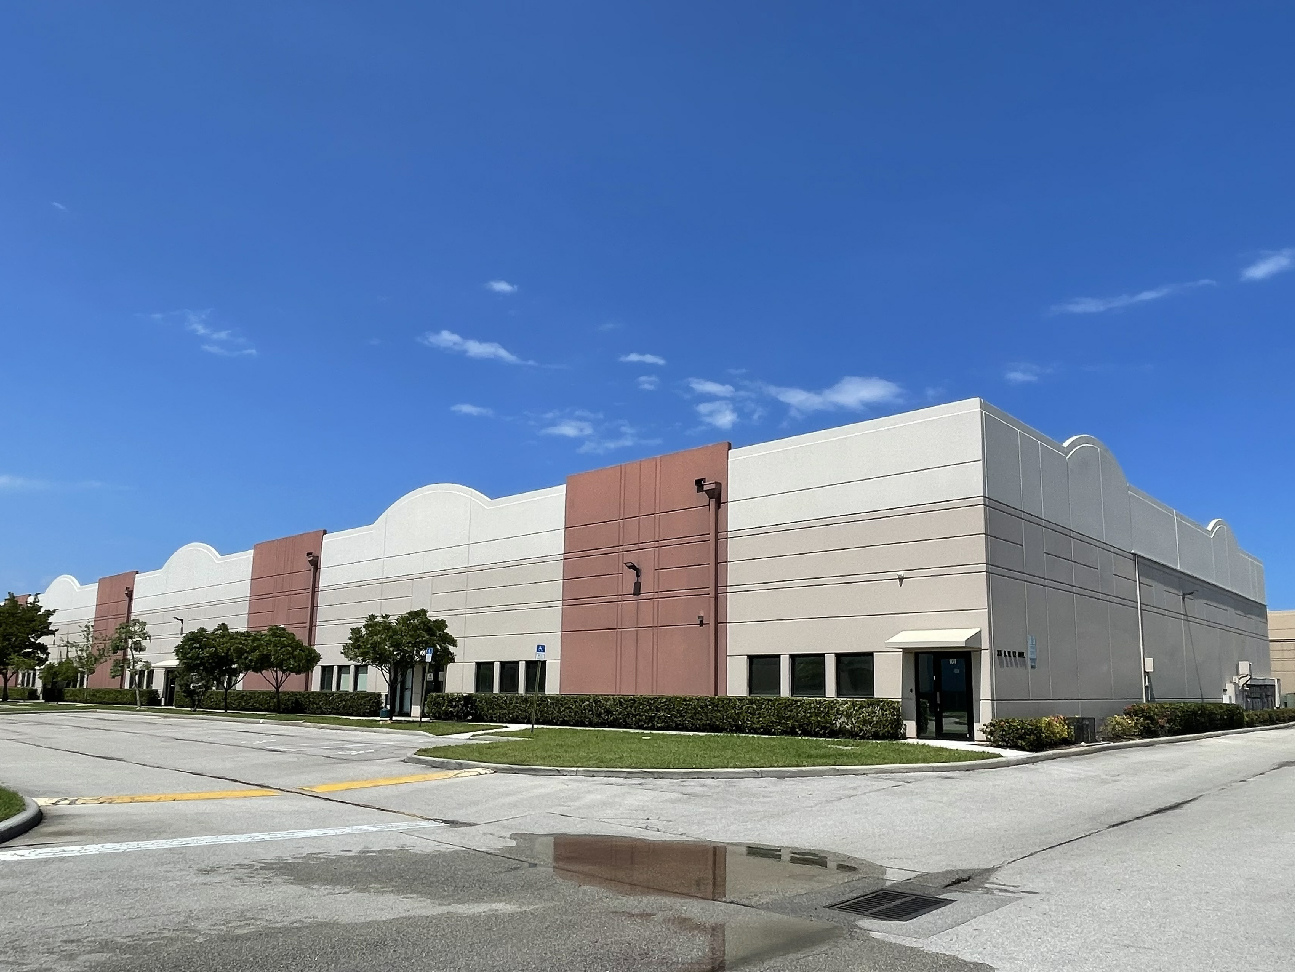 Warehouse on Market for $369 per sf